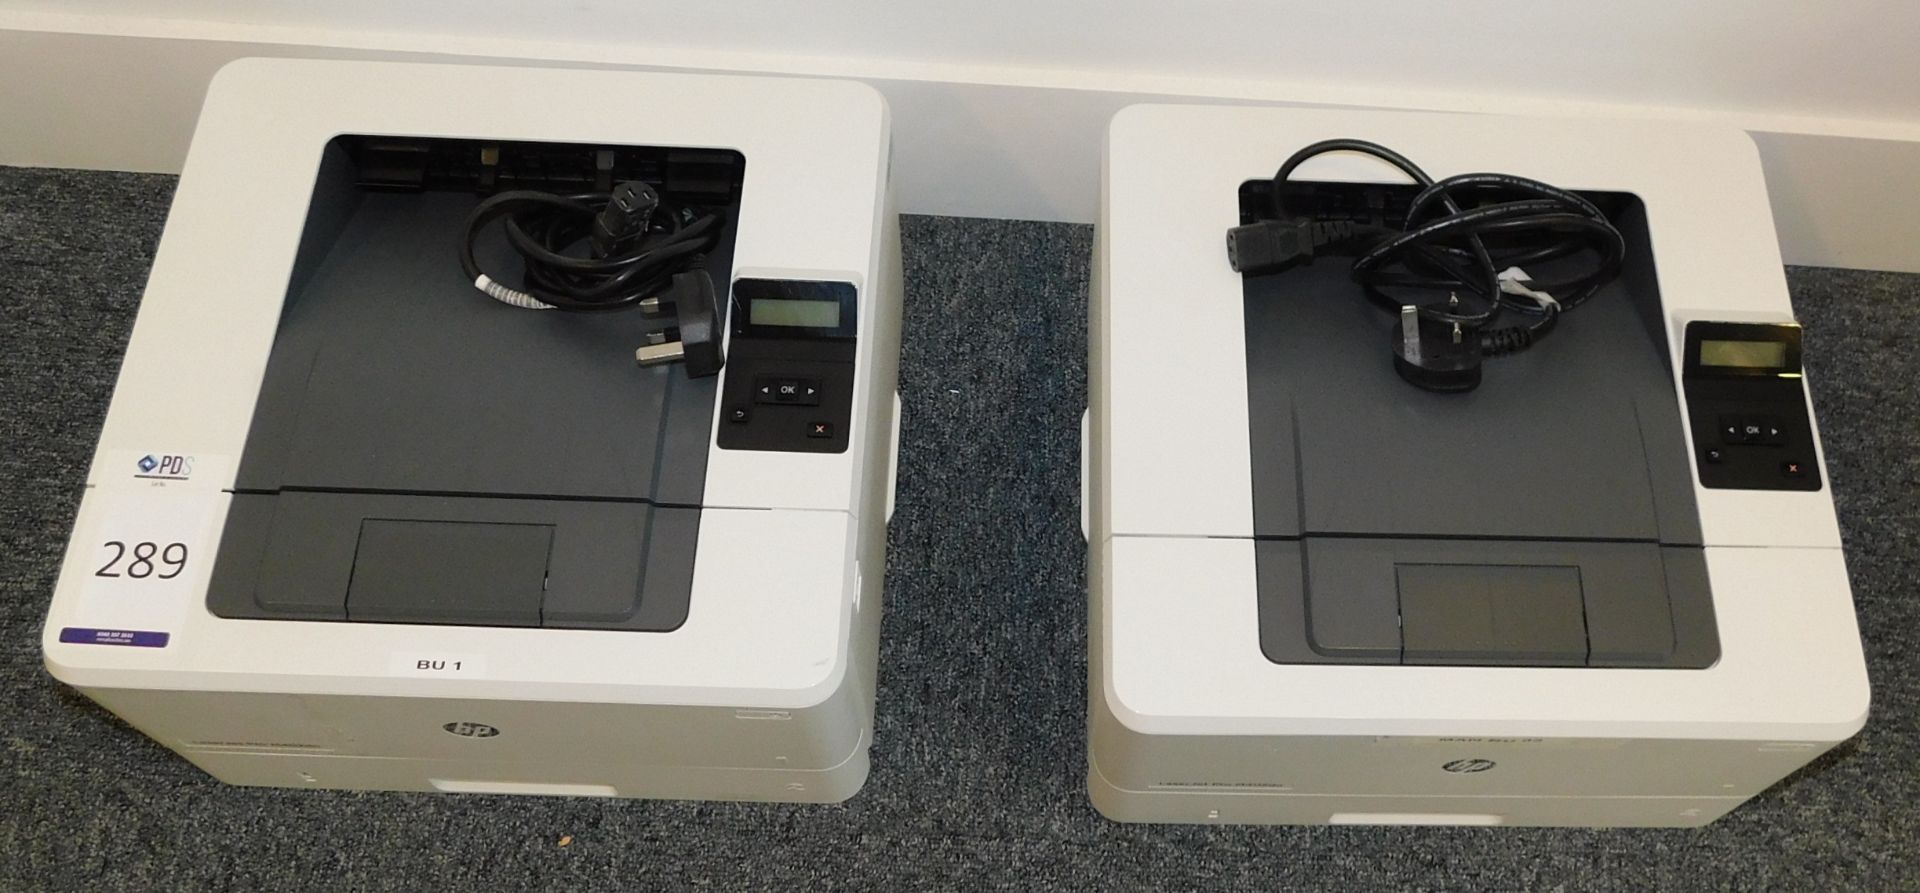 2 HP LaserJet Pro M402ln Printers (Located Stockport - See General Notes for More Details).